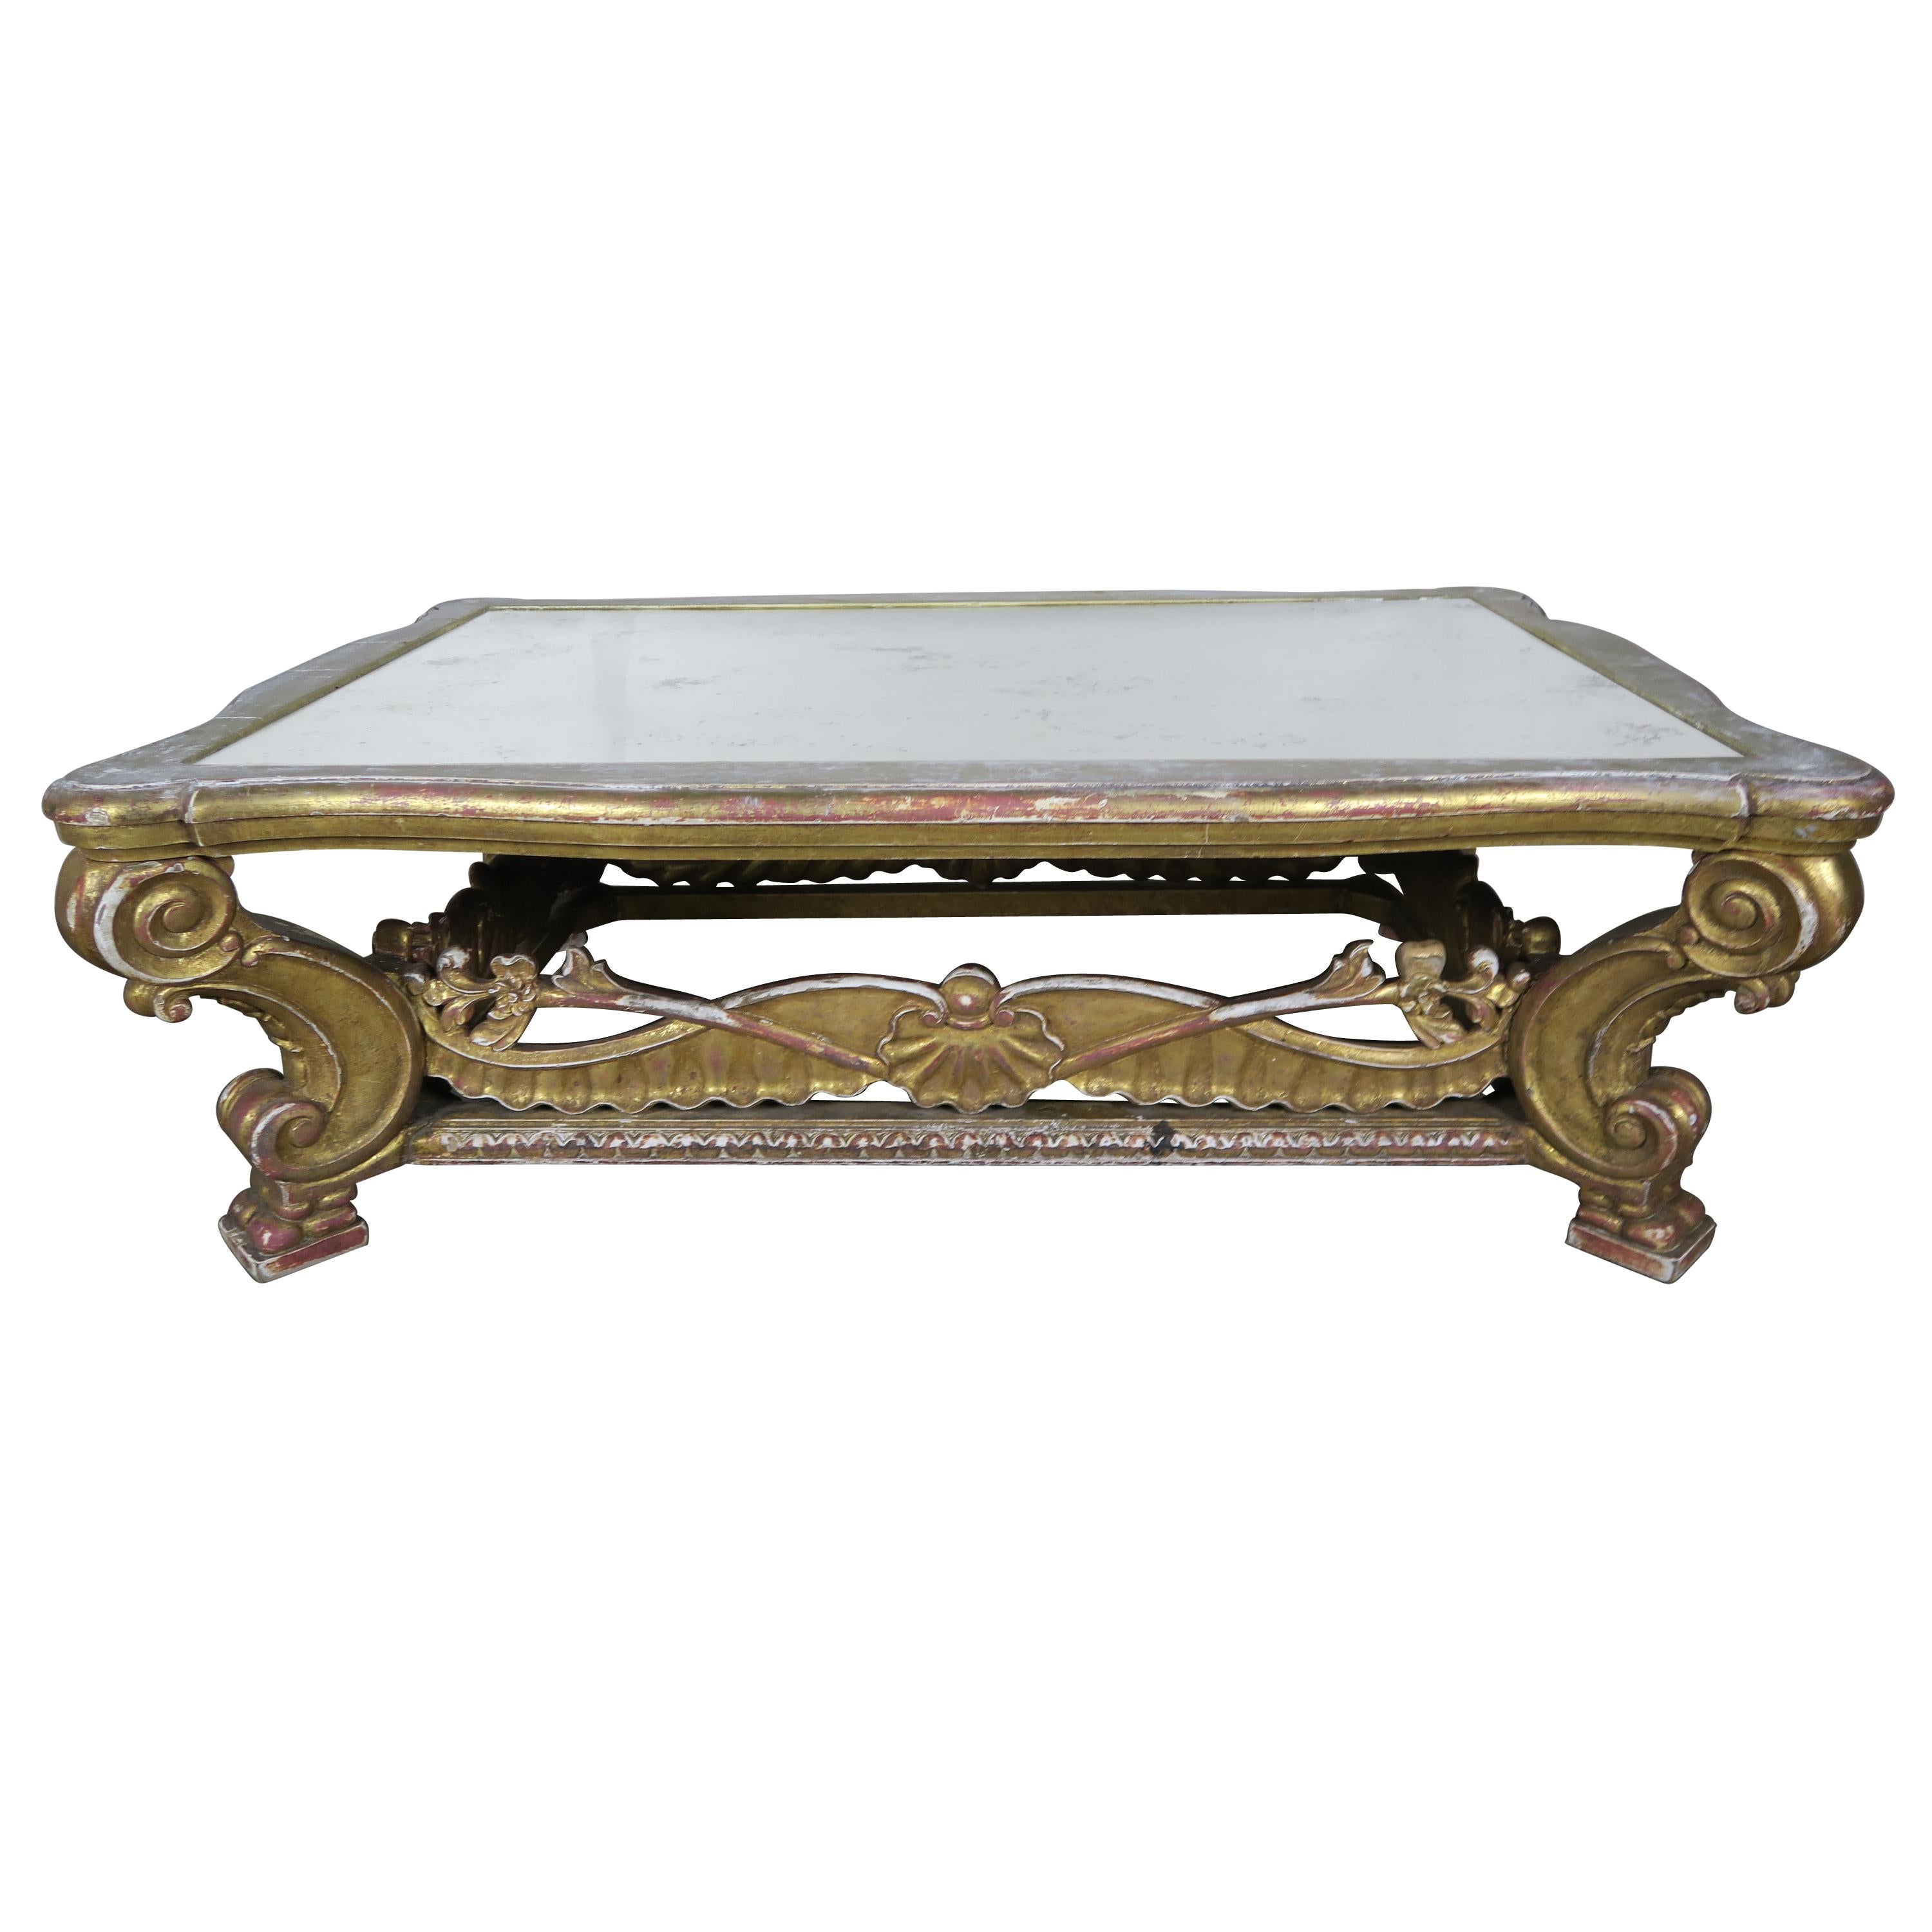 Italian Giltwood Coffee Table with Antique Mirrored Top